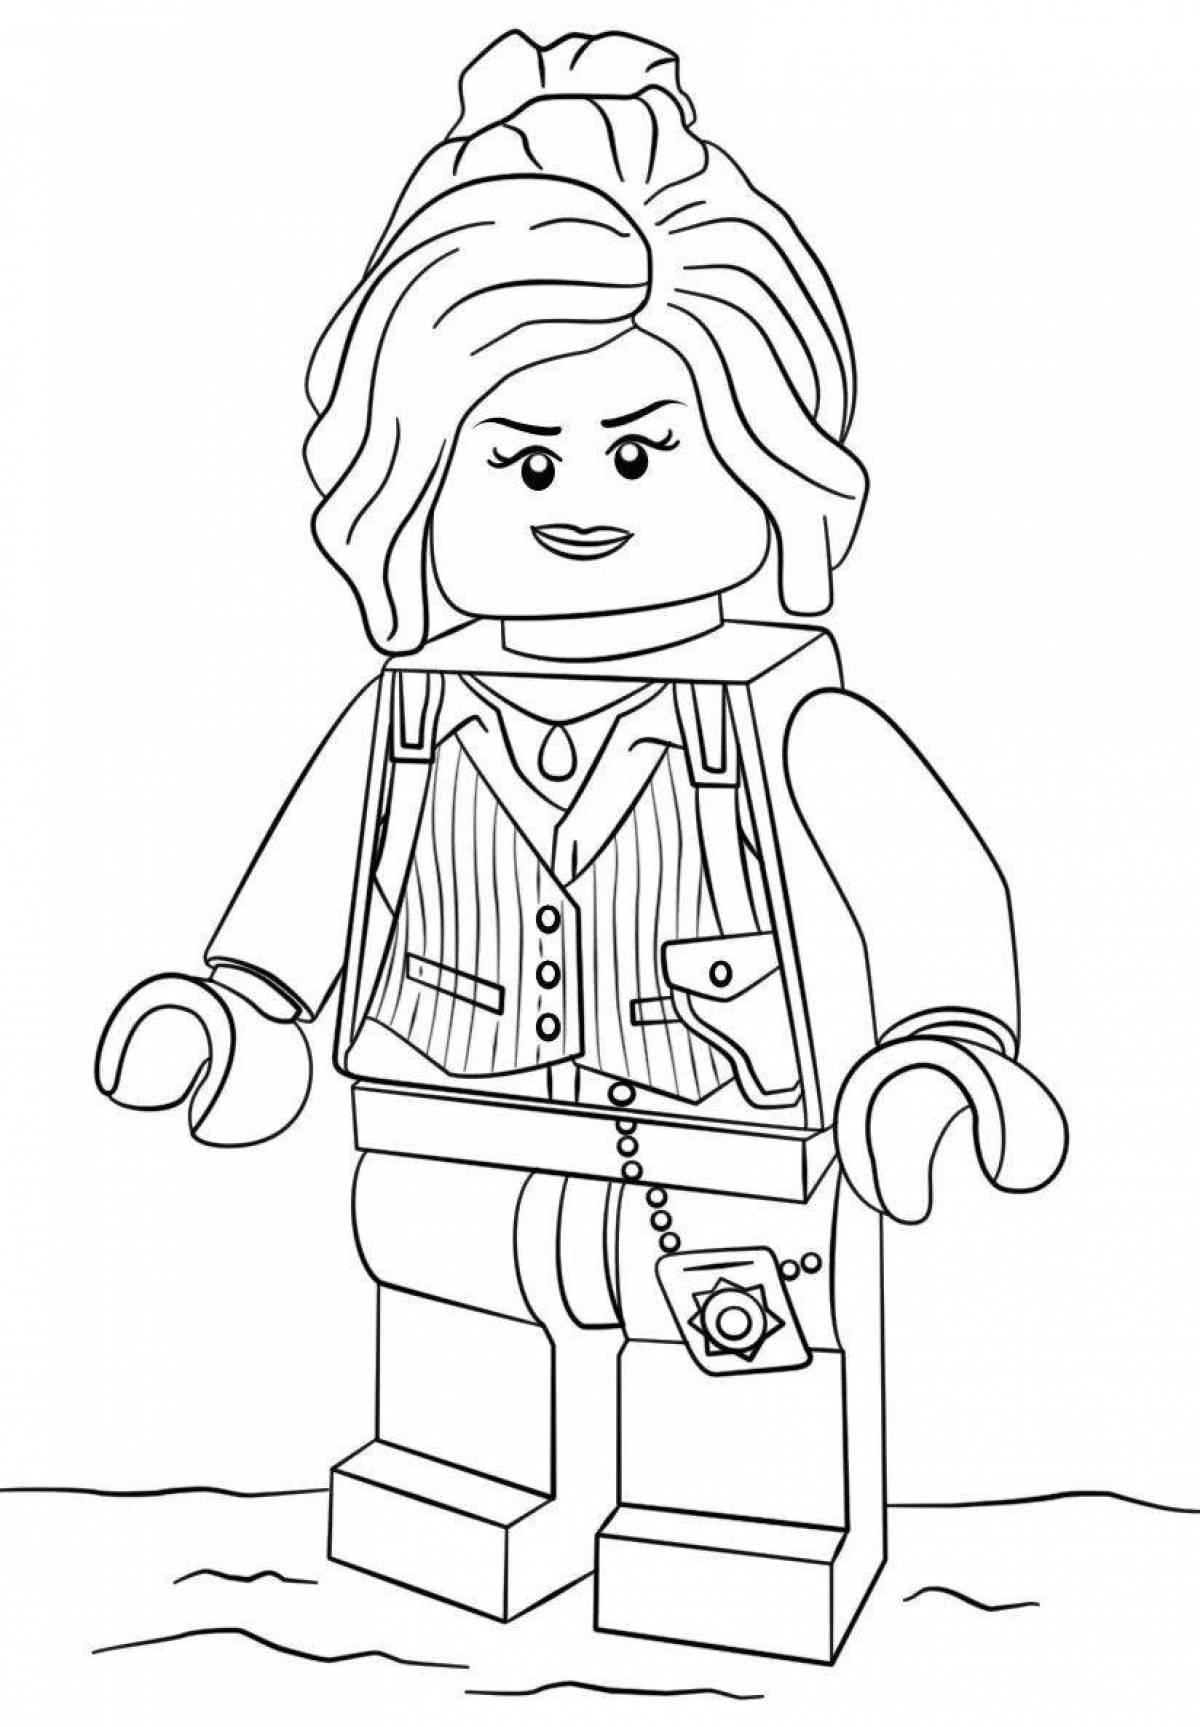 Awesome lego men coloring pages for kids